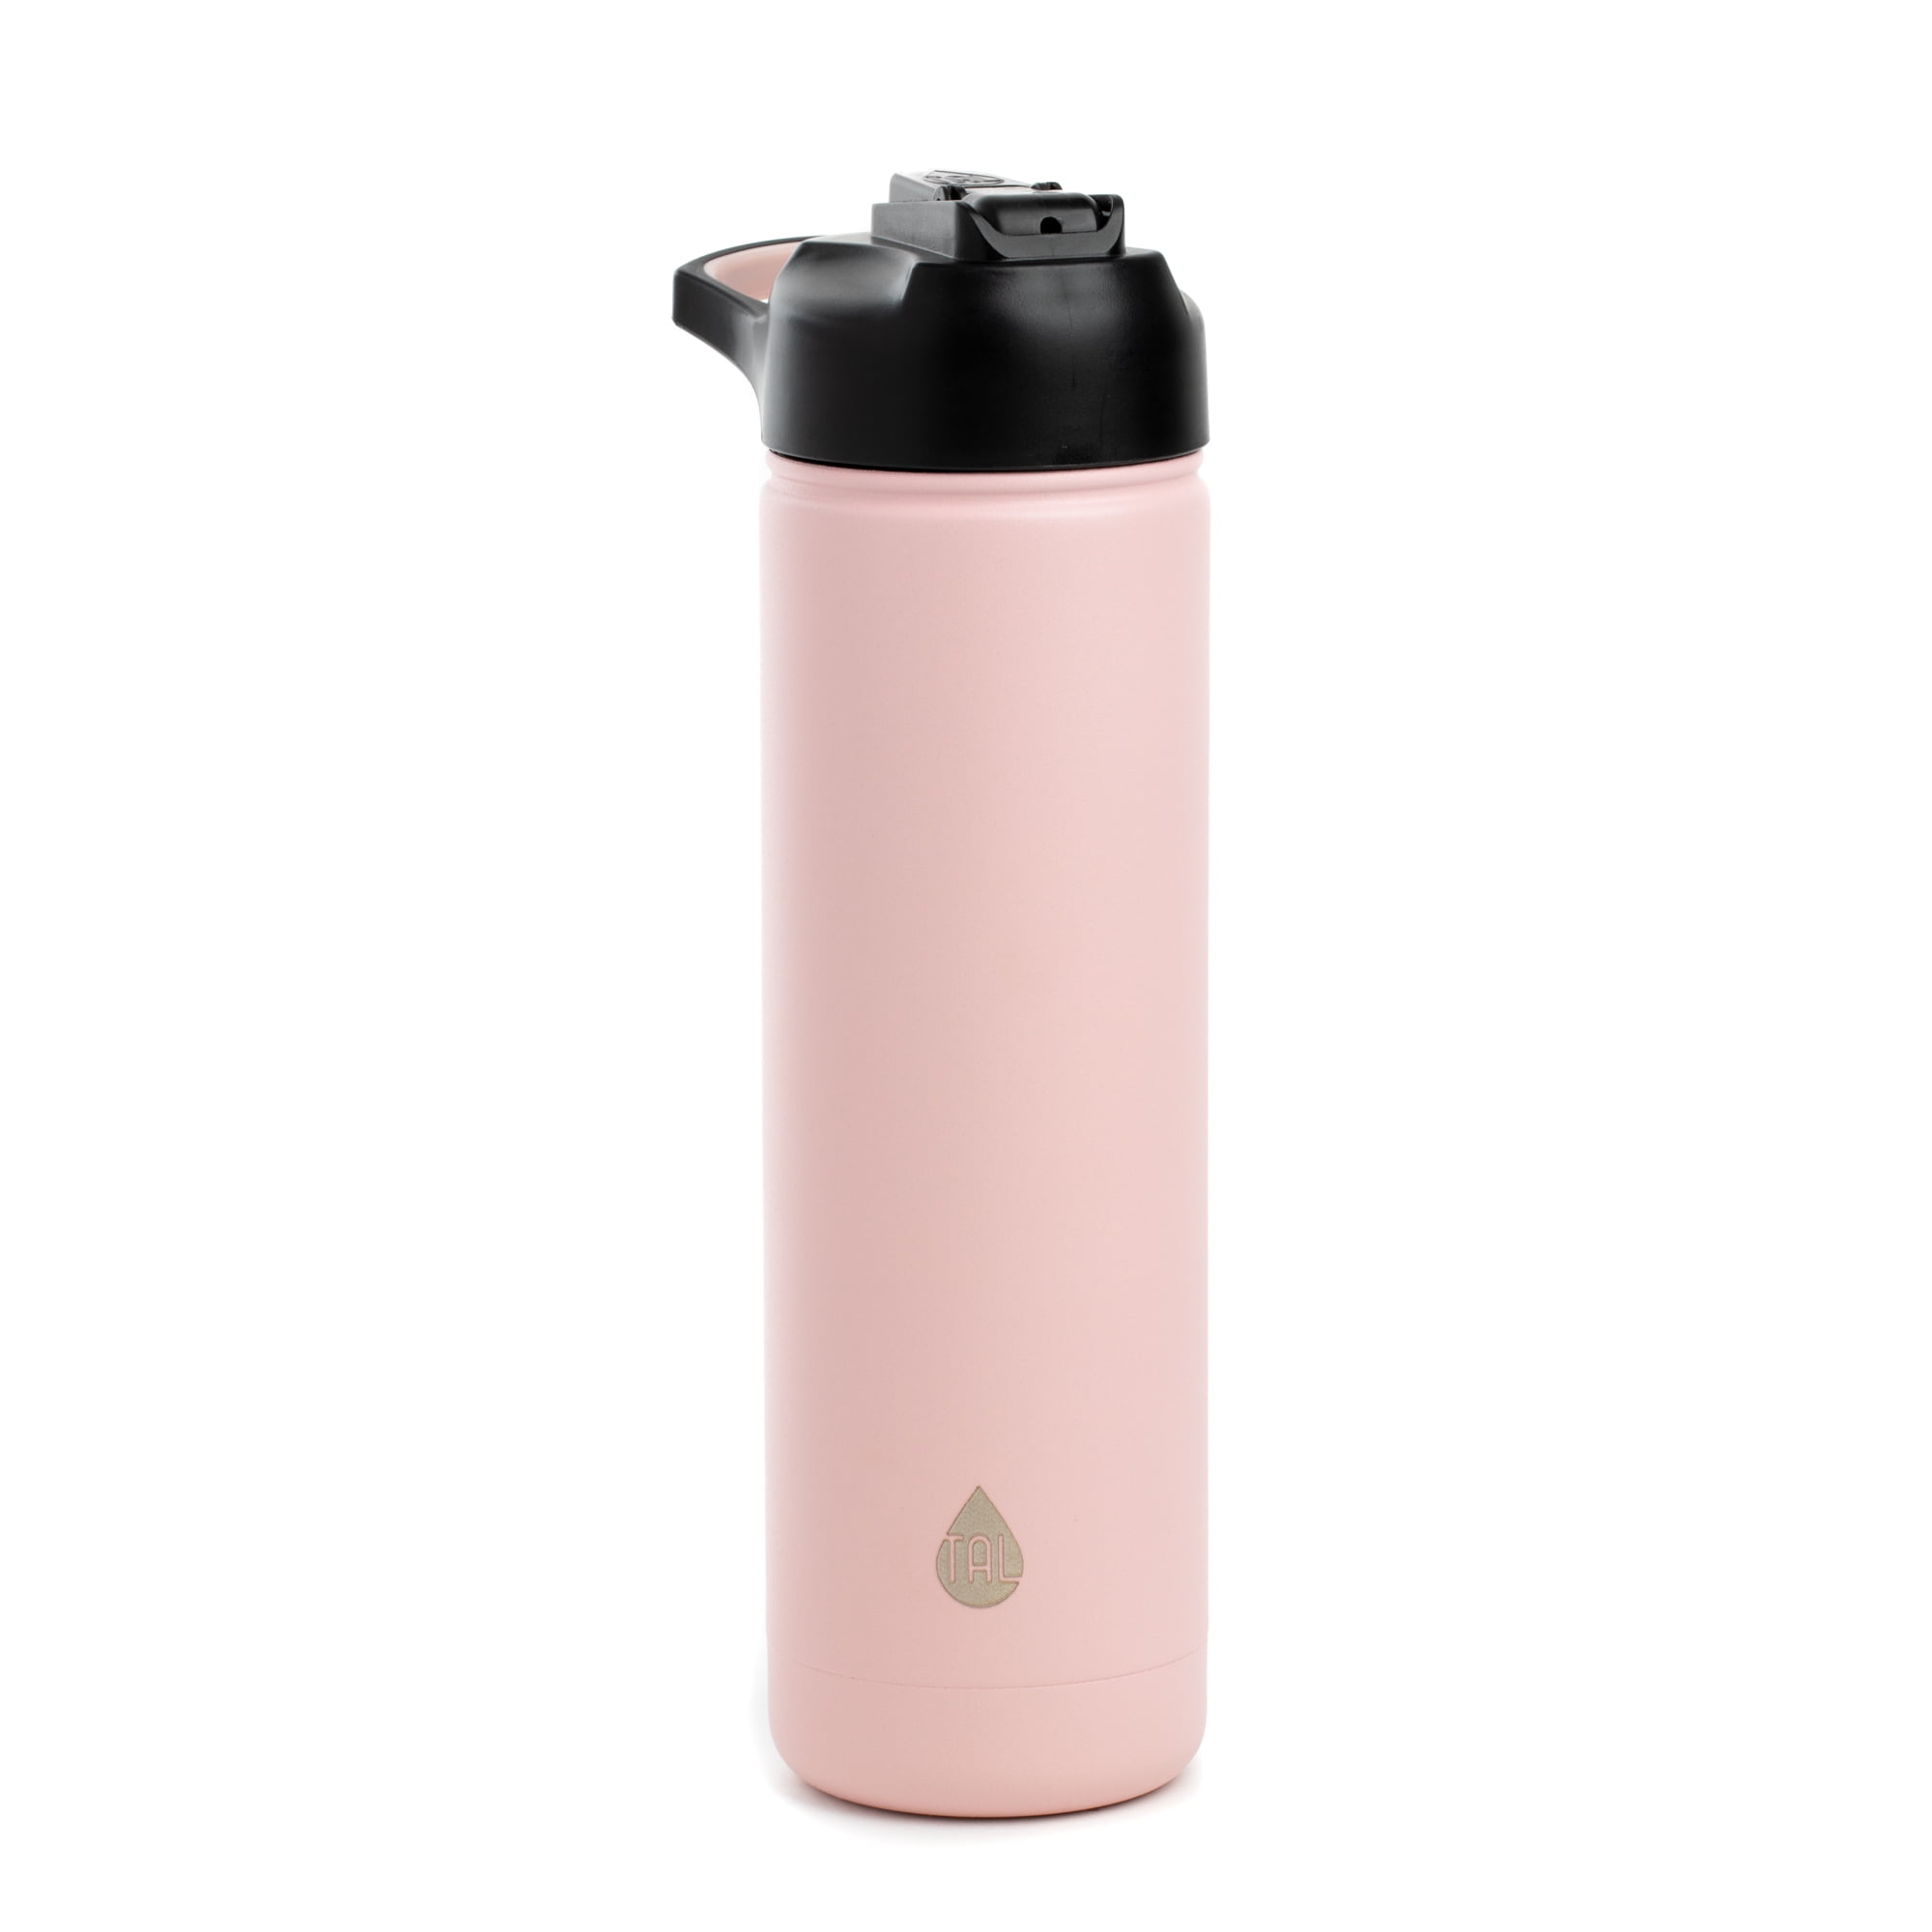 Tal Stainless Steel Water Bottle Replacement Lid